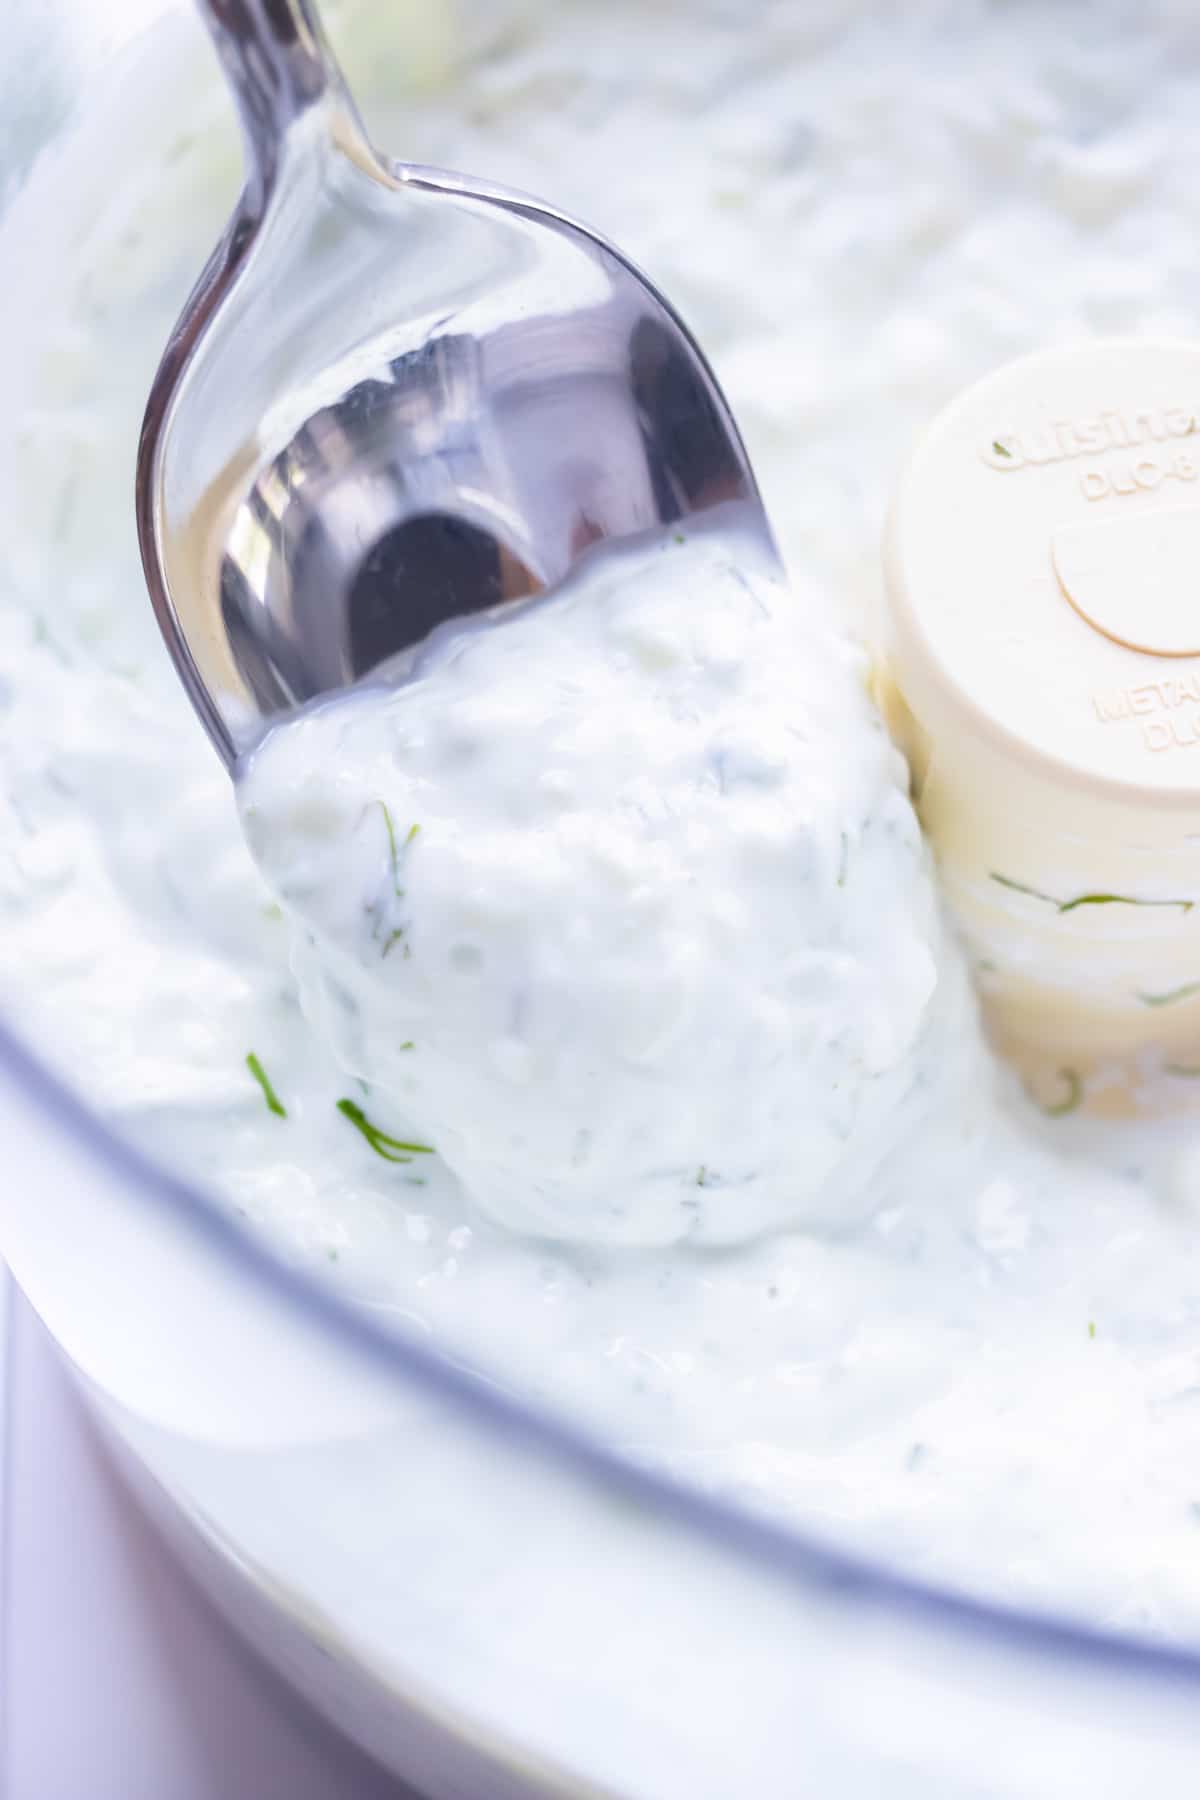 Use a spoon to remove low-carb Mediterranean dip from the food processor in preparation for serving.